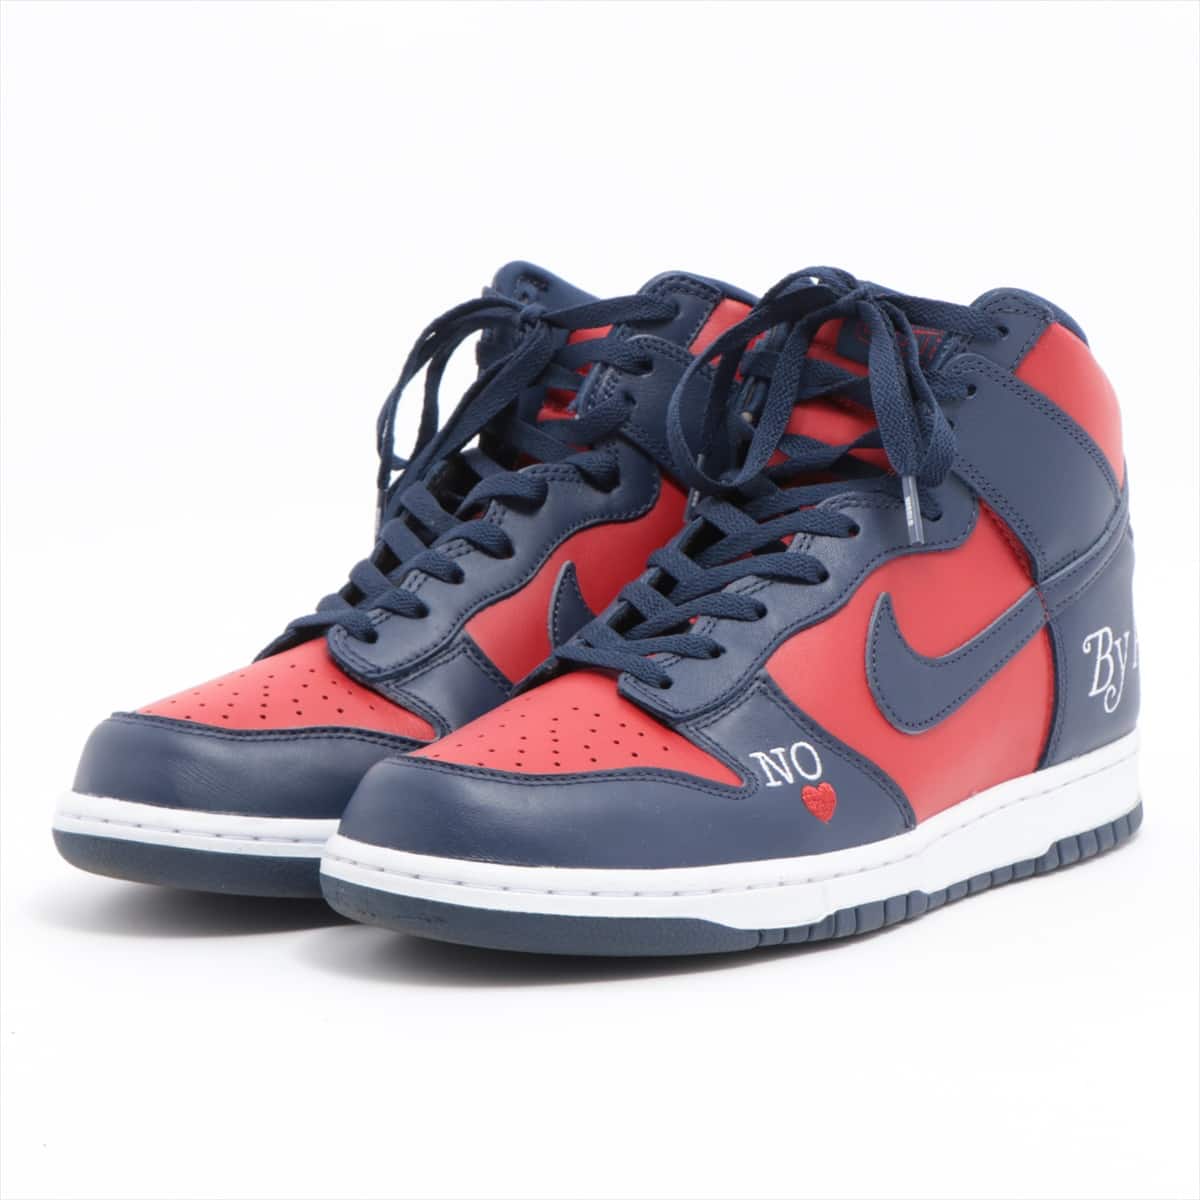 NIKE × Supreme Leather High-top Sneakers 29 Men's Navy x red NIKE SB DUNK HIGH OG QS DN3741-600